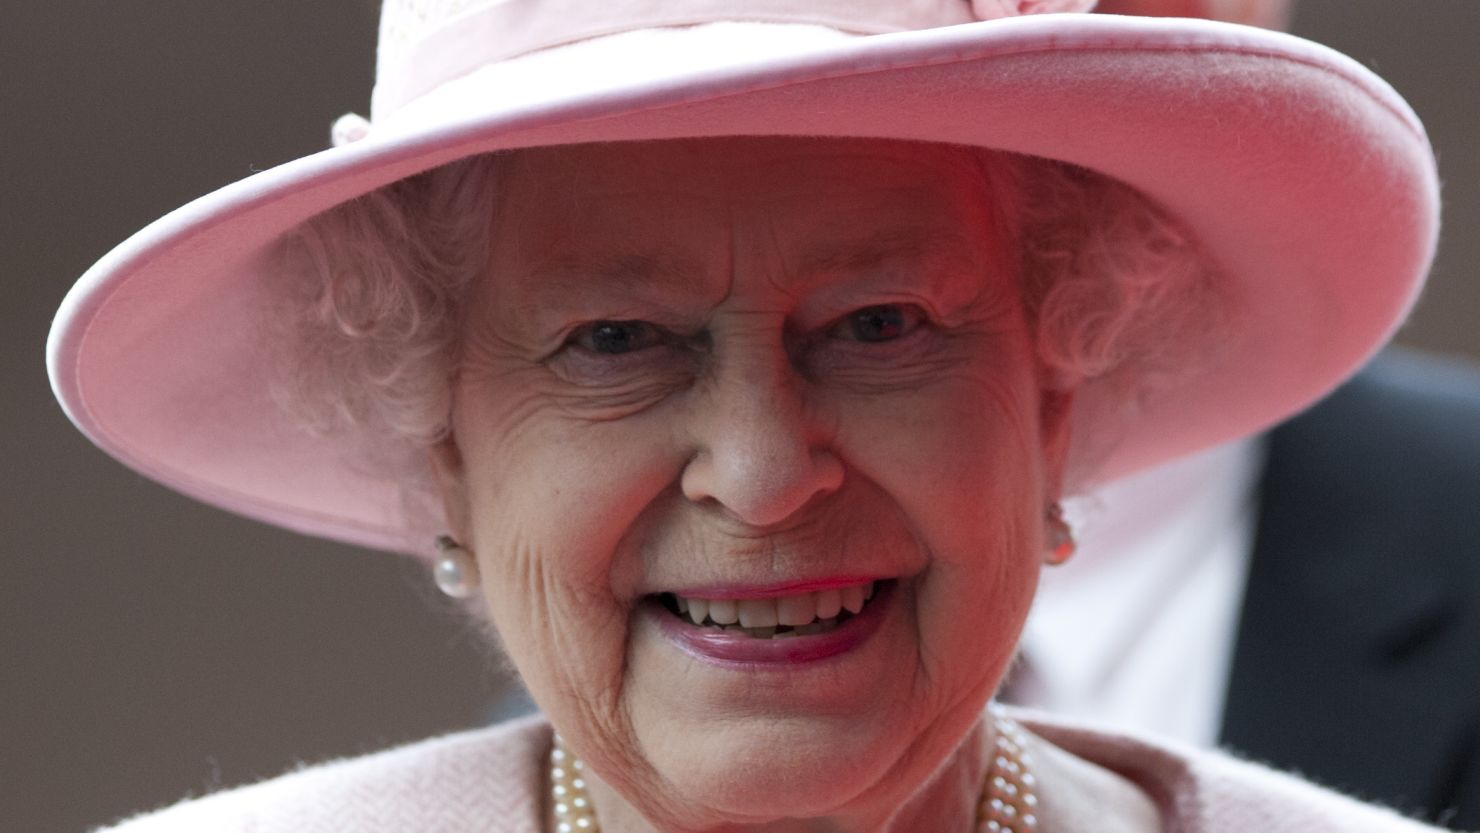 Queen Elizabeth II, pictured here in Manchester on March 23, 2012, is said to be celebrating her birthday privately.